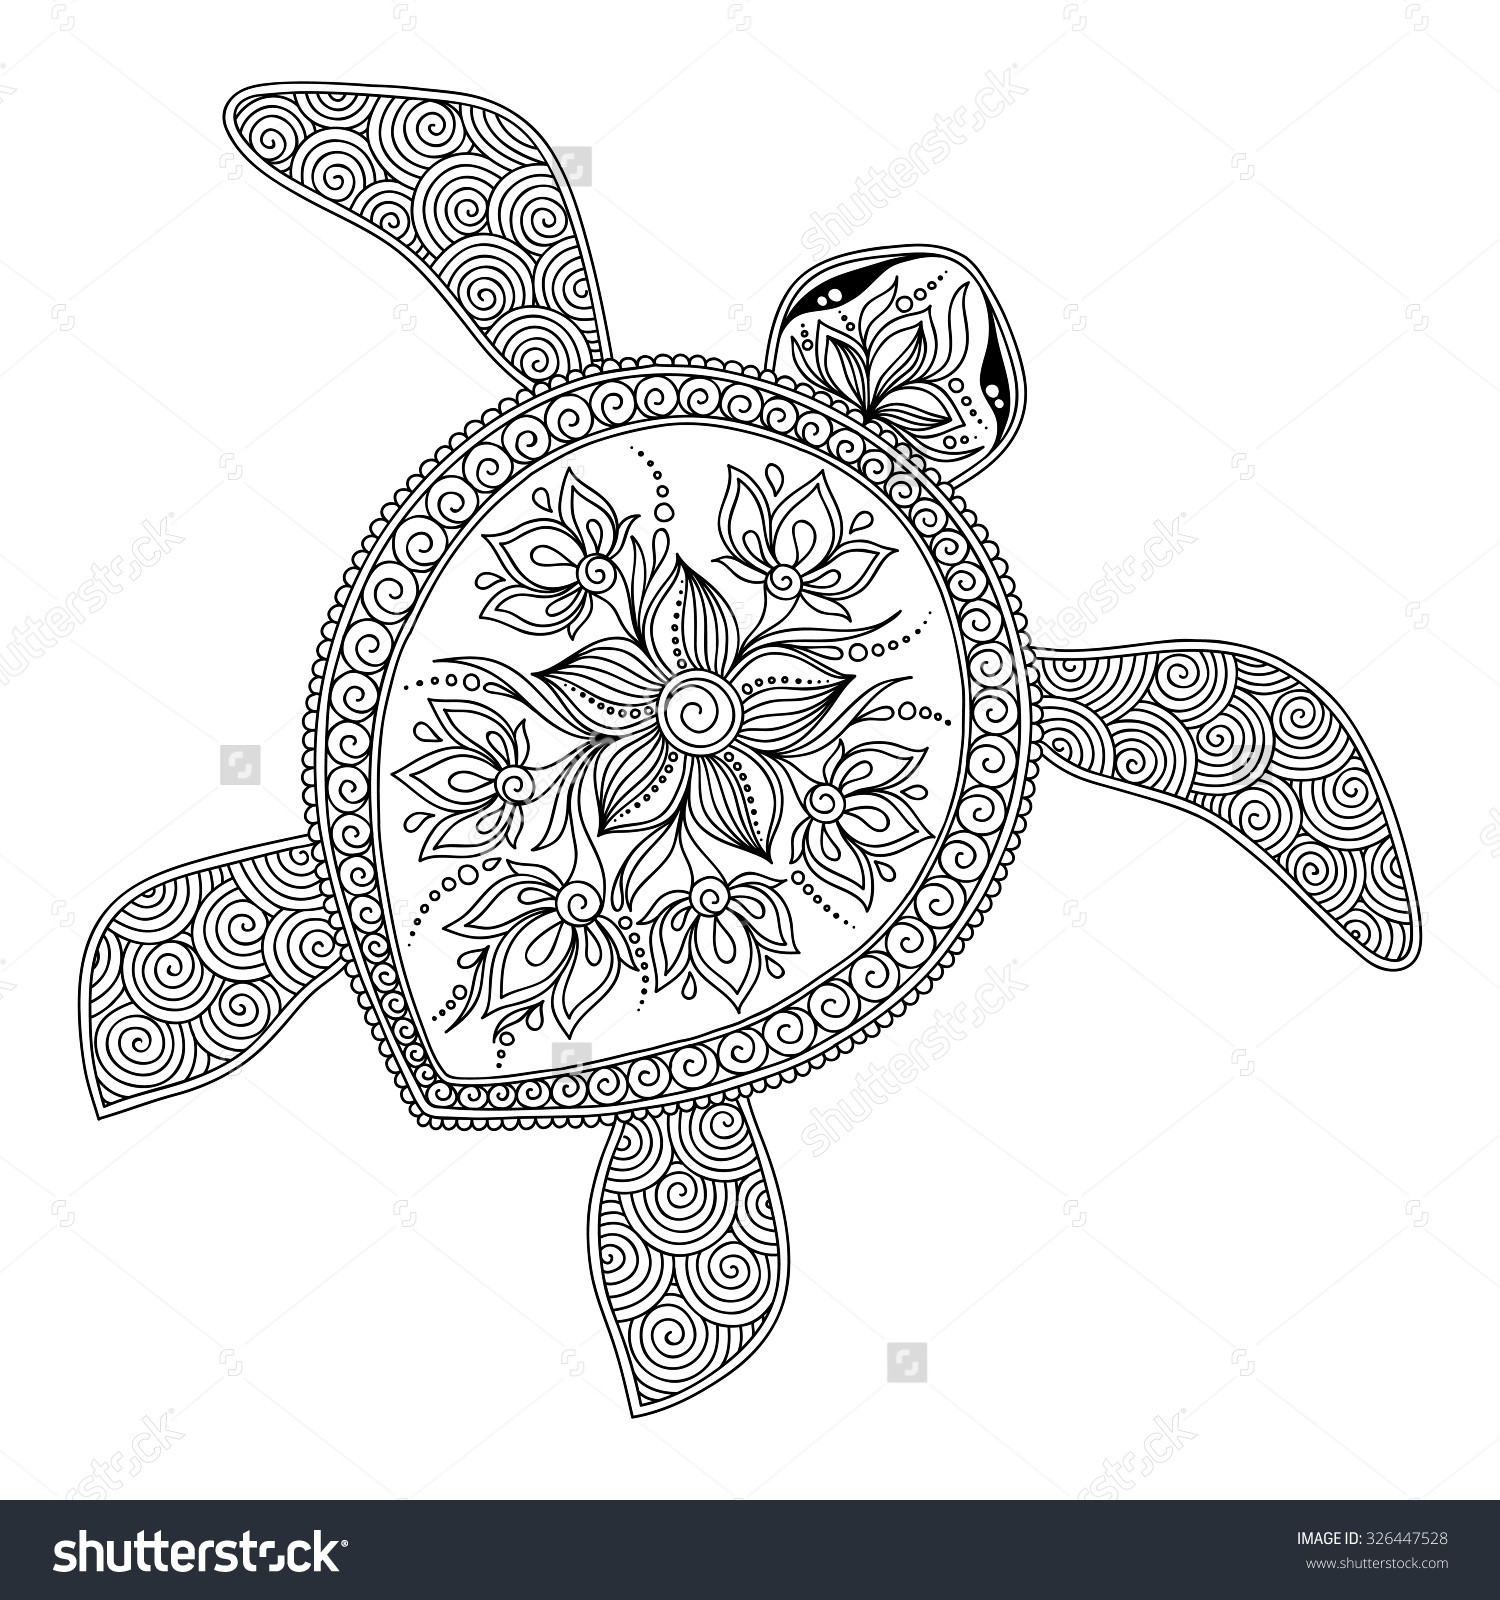 Adult Coloring Pages Animal Patterns
 Sea Turtle Adult Coloring Pages Animal Patterns Printable